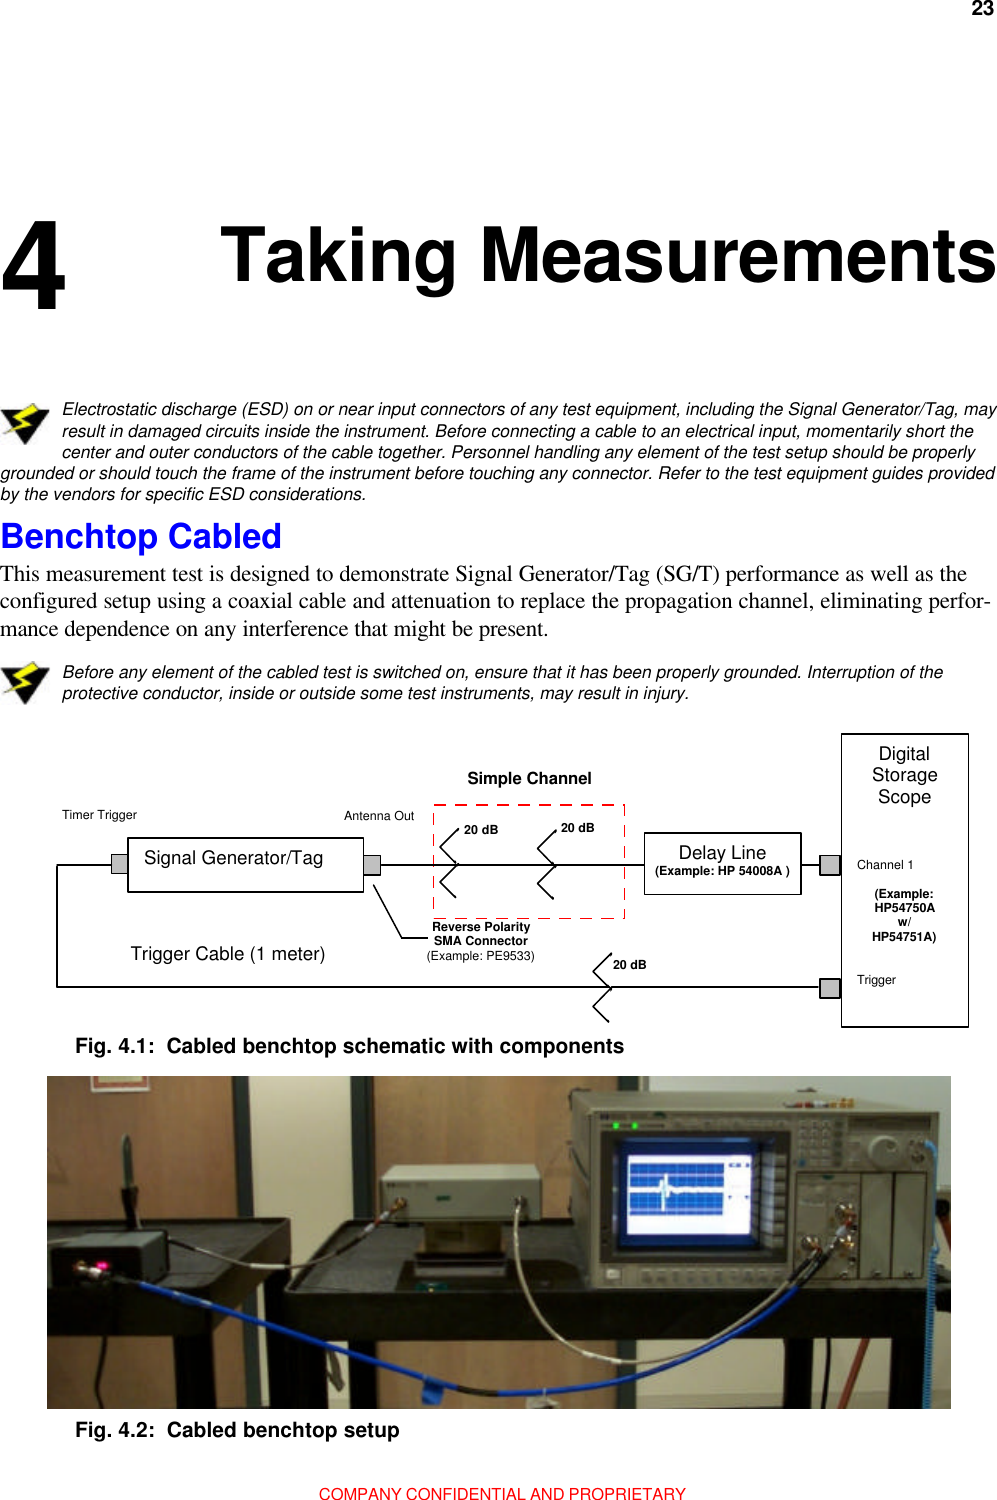 23Chapter 4: Taking MeasurementsCOMPANY CONFIDENTIAL AND PROPRIETARYElectrostatic discharge (ESD) on or near input connectors of any test equipment, including the Signal Generator/Tag, mayresult in damaged circuits inside the instrument. Before connecting a cable to an electrical input, momentarily short thecenter and outer conductors of the cable together. Personnel handling any element of the test setup should be properlygrounded or should touch the frame of the instrument before touching any connector. Refer to the test equipment guides providedby the vendors for specific ESD considerations.Benchtop CabledThis measurement test is designed to demonstrate Signal Generator/Tag (SG/T) performance as well as theconfigured setup using a coaxial cable and attenuation to replace the propagation channel, eliminating perfor-mance dependence on any interference that might be present.Before any element of the cabled test is switched on, ensure that it has been properly grounded. Interruption of theprotective conductor, inside or outside some test instruments, may result in injury.Fig. 4.2:  Cabled benchtop setupFig. 4.1:  Cabled benchtop schematic with components4   Signal Generator/Tag Antenna Out Timer Trigger Reverse Polarity SMA Connector (Example: PE9533) 20 dB Simple Channel Digital Storage Scope    Channel 1       (Example: HP54750A w/ HP54751A)   Trigger 20 dB 20 dB Trigger Cable (1 meter) Delay Line (Example: HP 54008A ) Taking Measurements